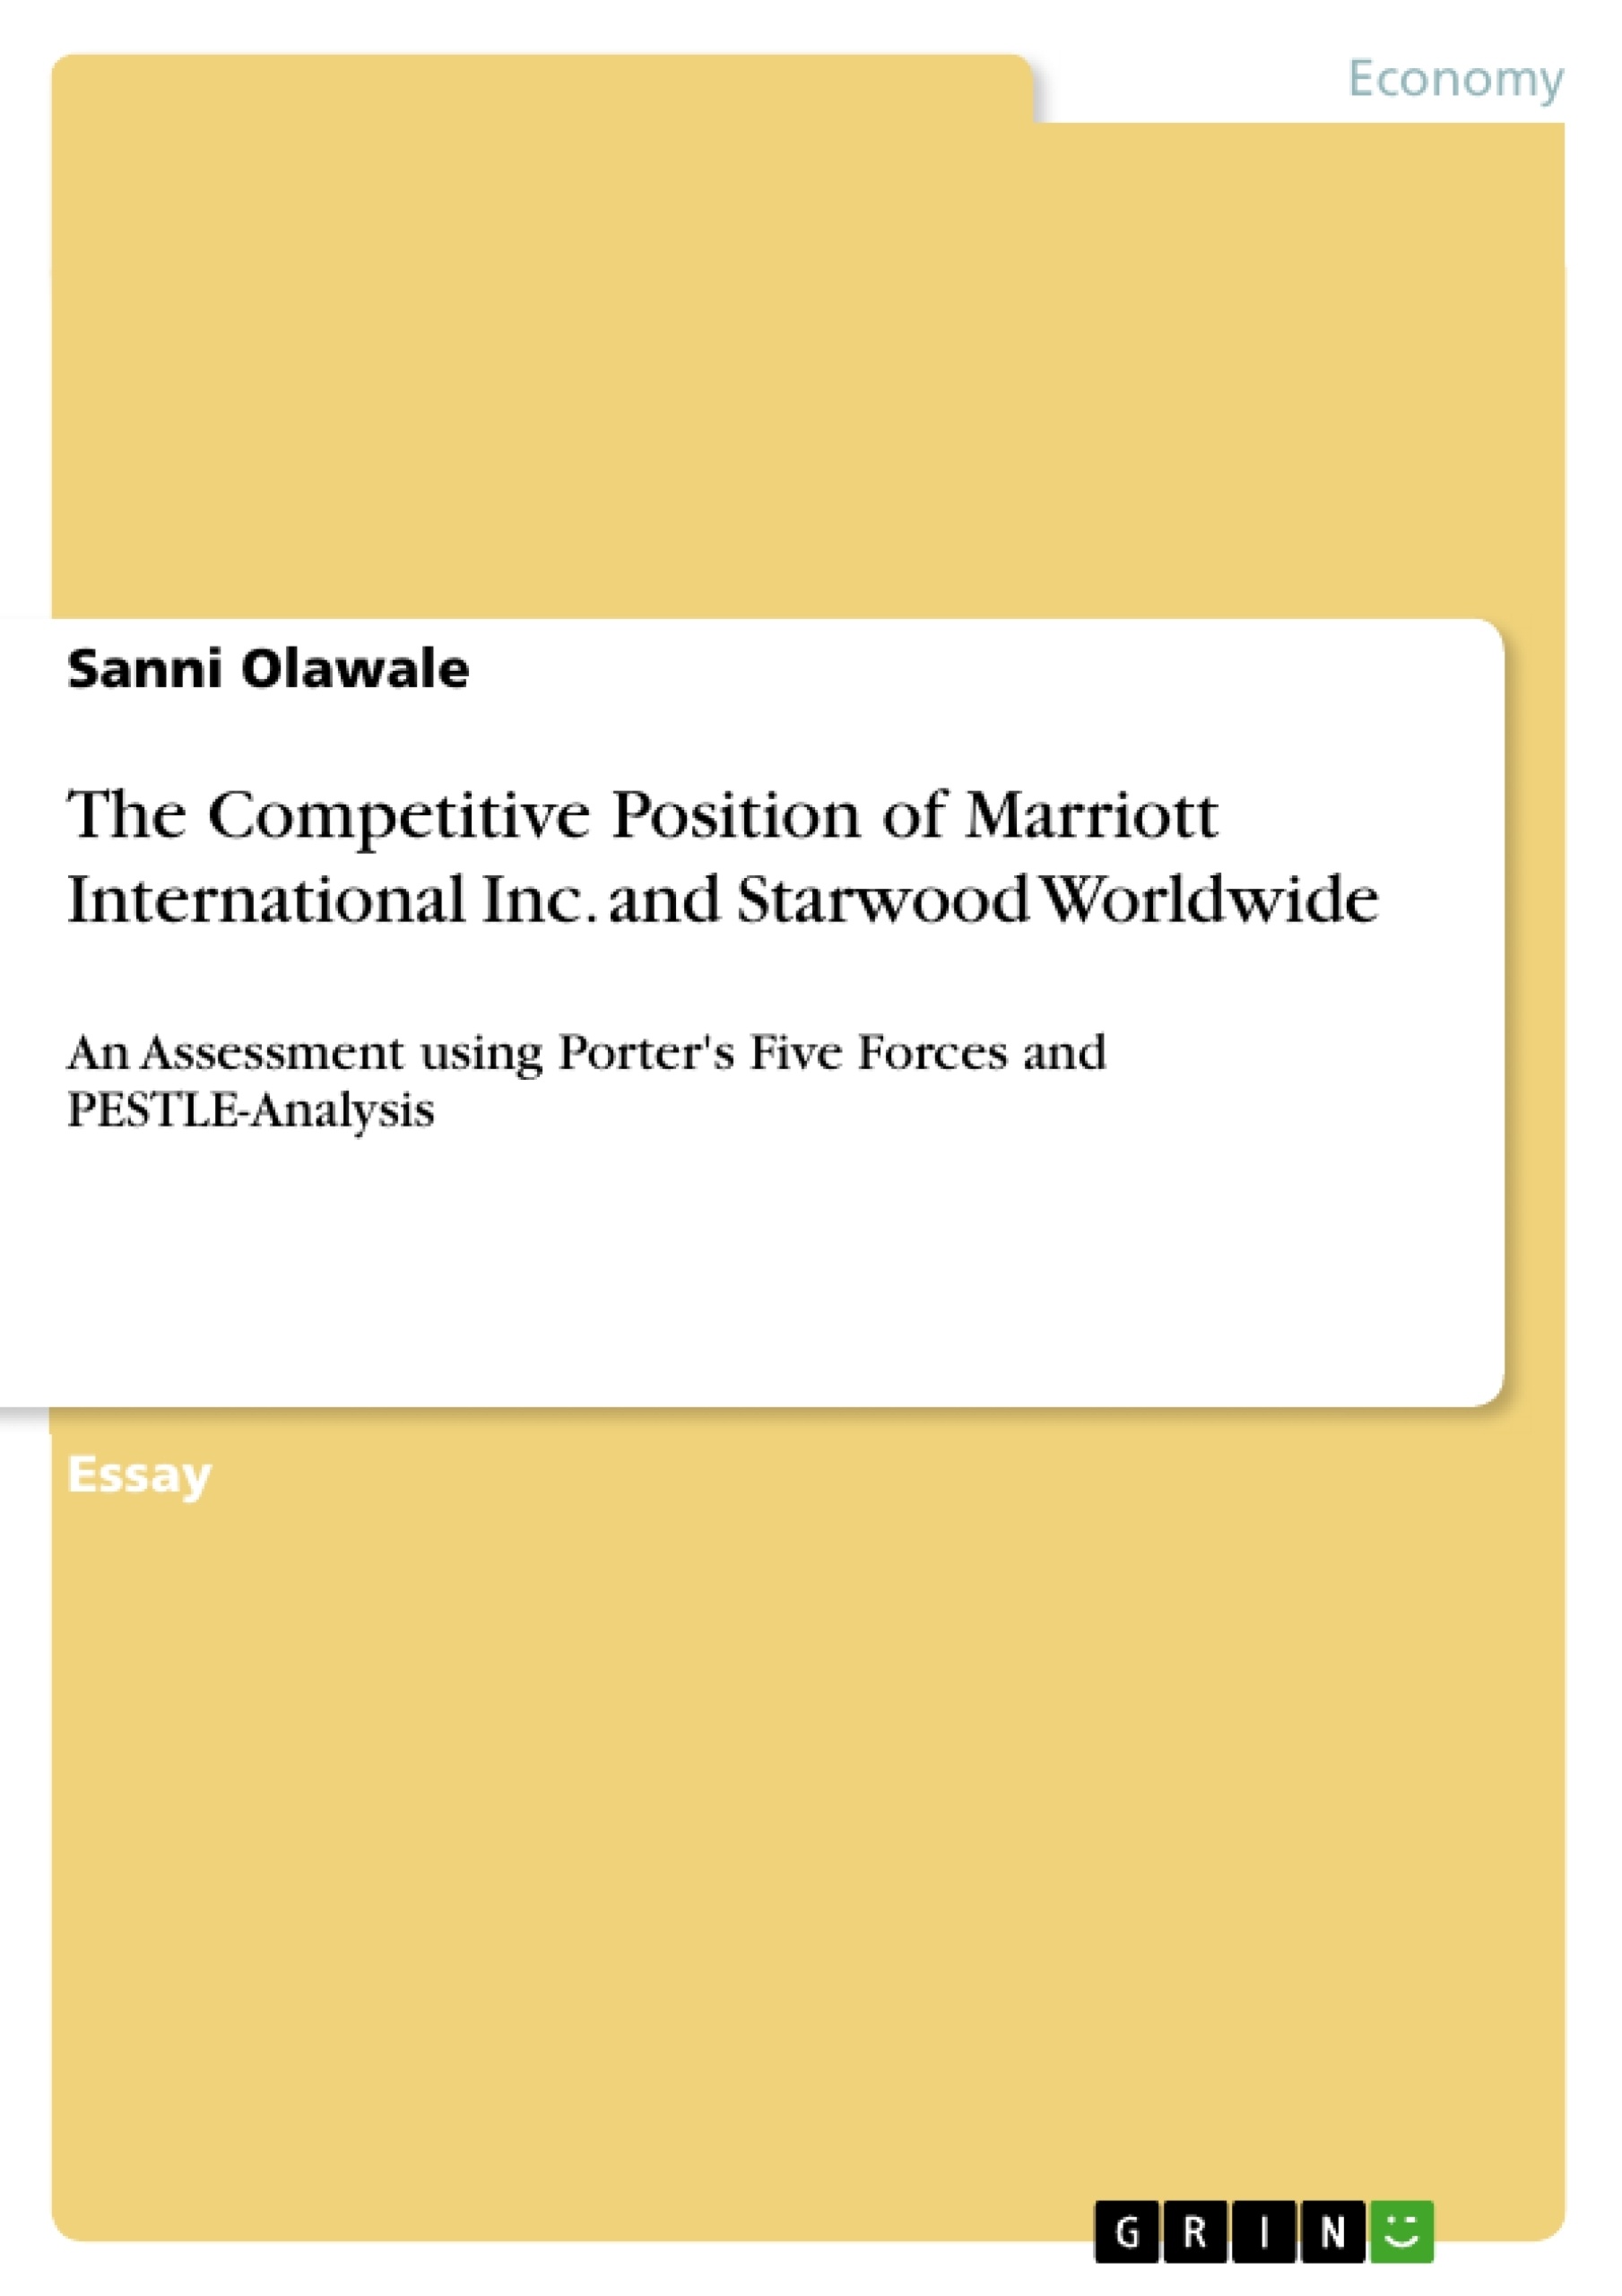 Título: The Competitive Position of Marriott International Inc. and Starwood Worldwide